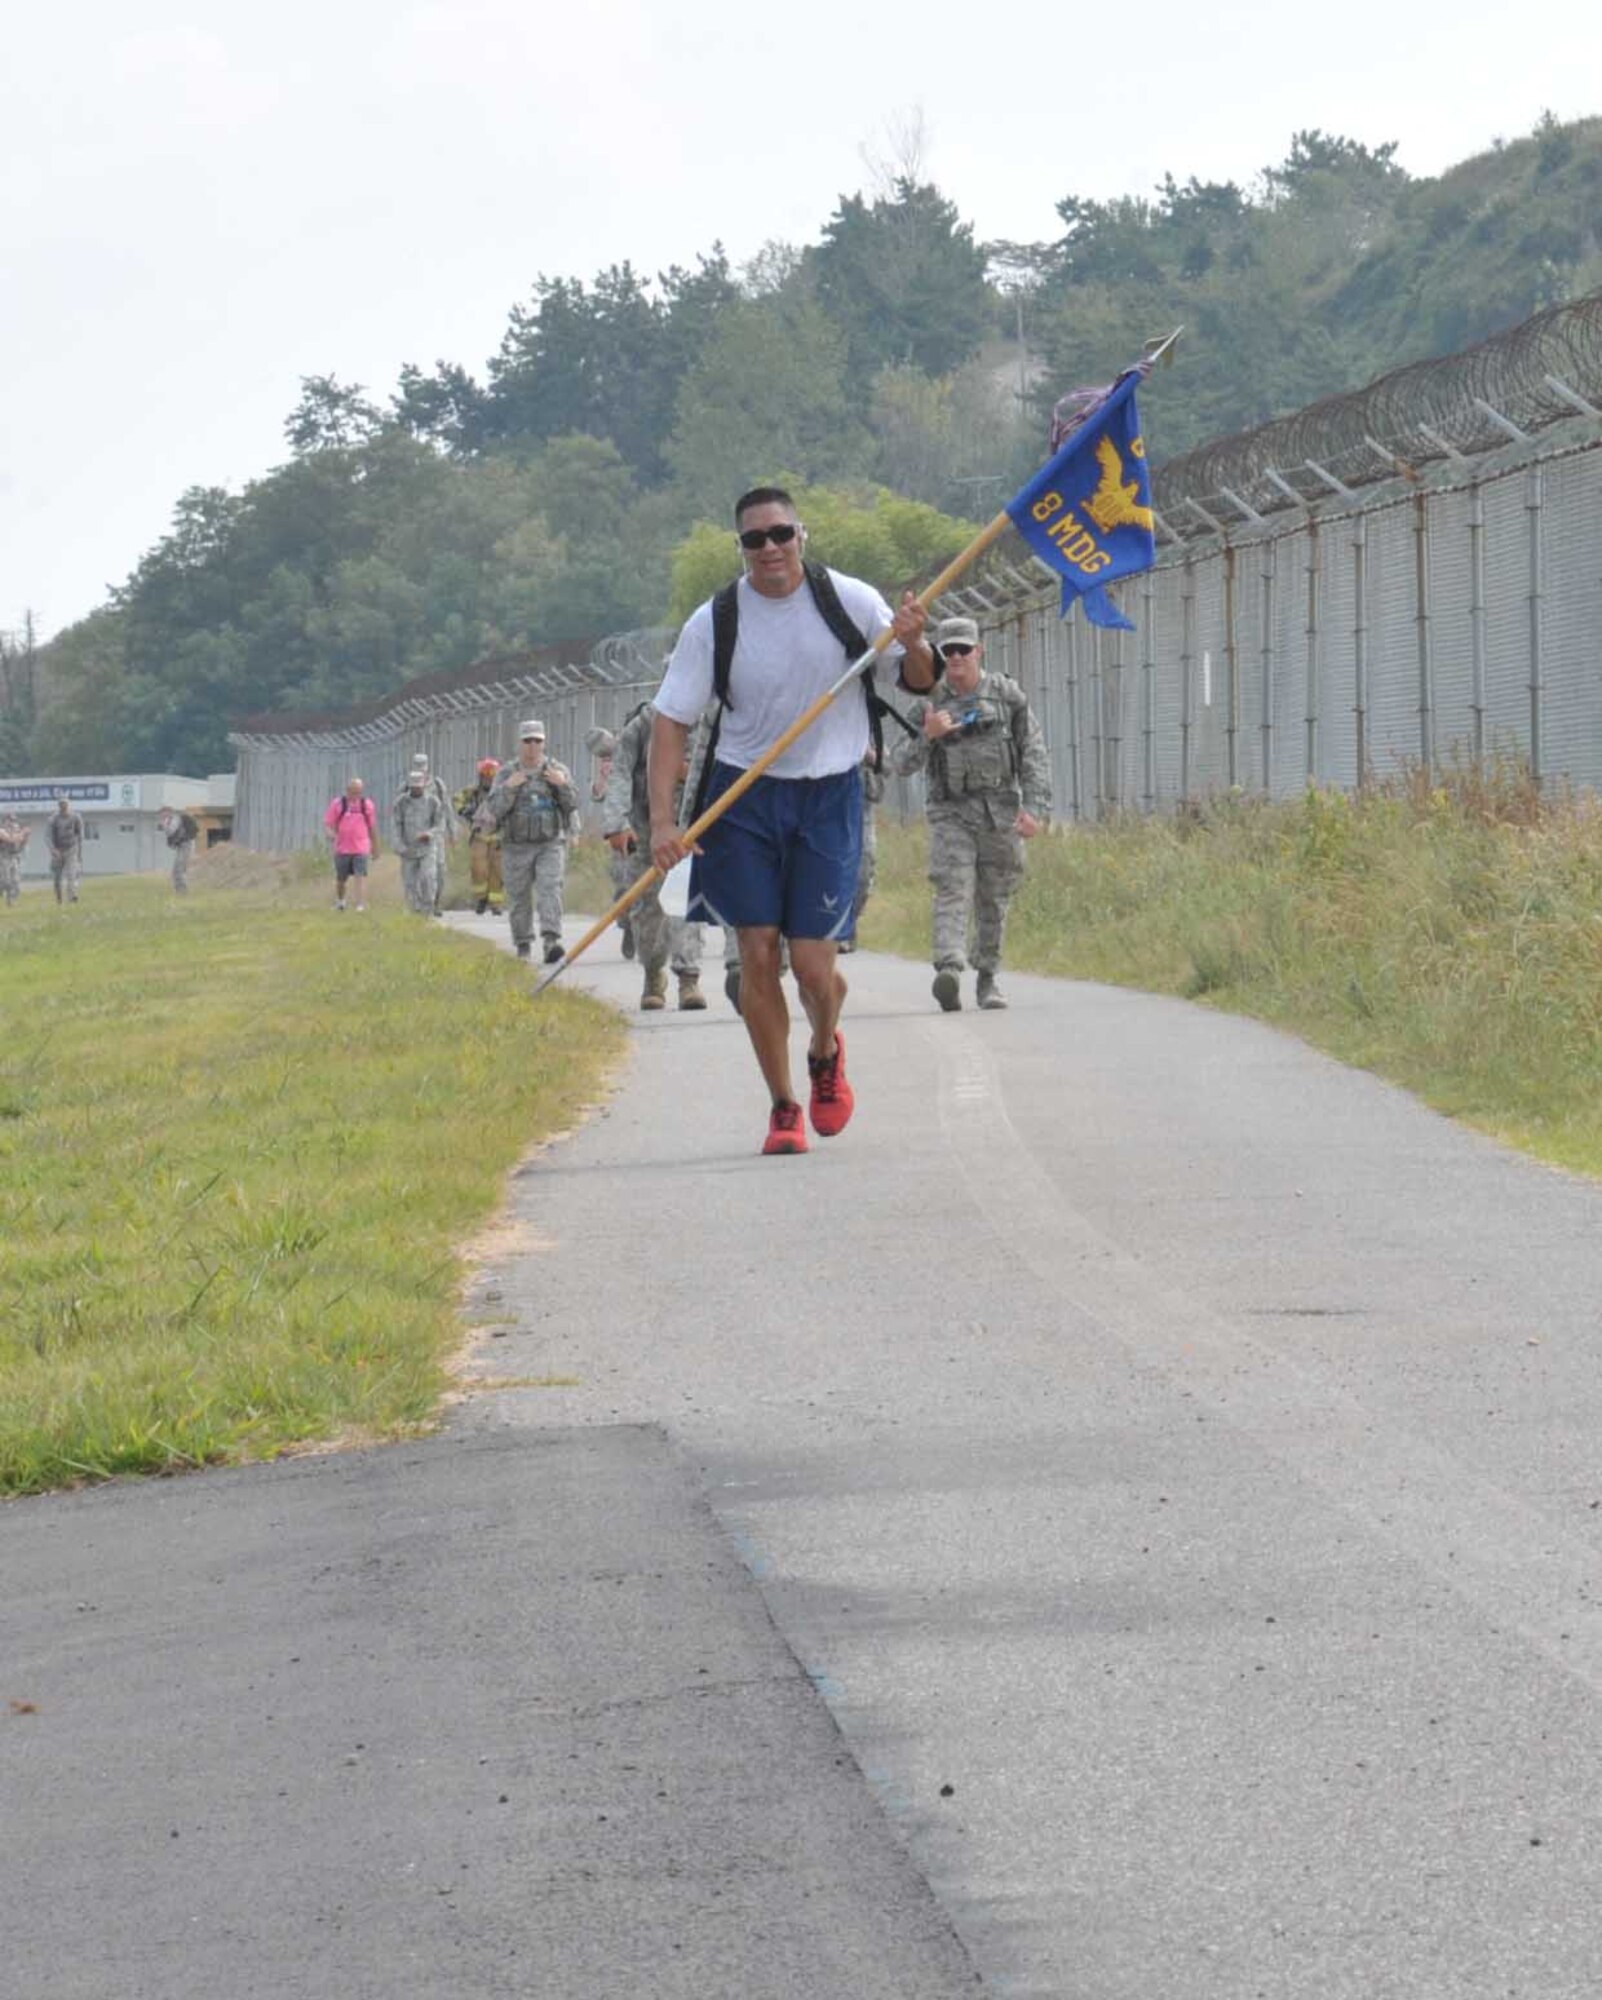 Members of the 8th Fighter Wing participate in a ruck march in remembrance of 9/11 at Kunsan Air Base, Republic of Korea, September 11, 2015. Airmen participated in the ruck march to honor those that gave their lives September 11, 2001. (U.S. Air Force photo by SrA Dustin King/Released)